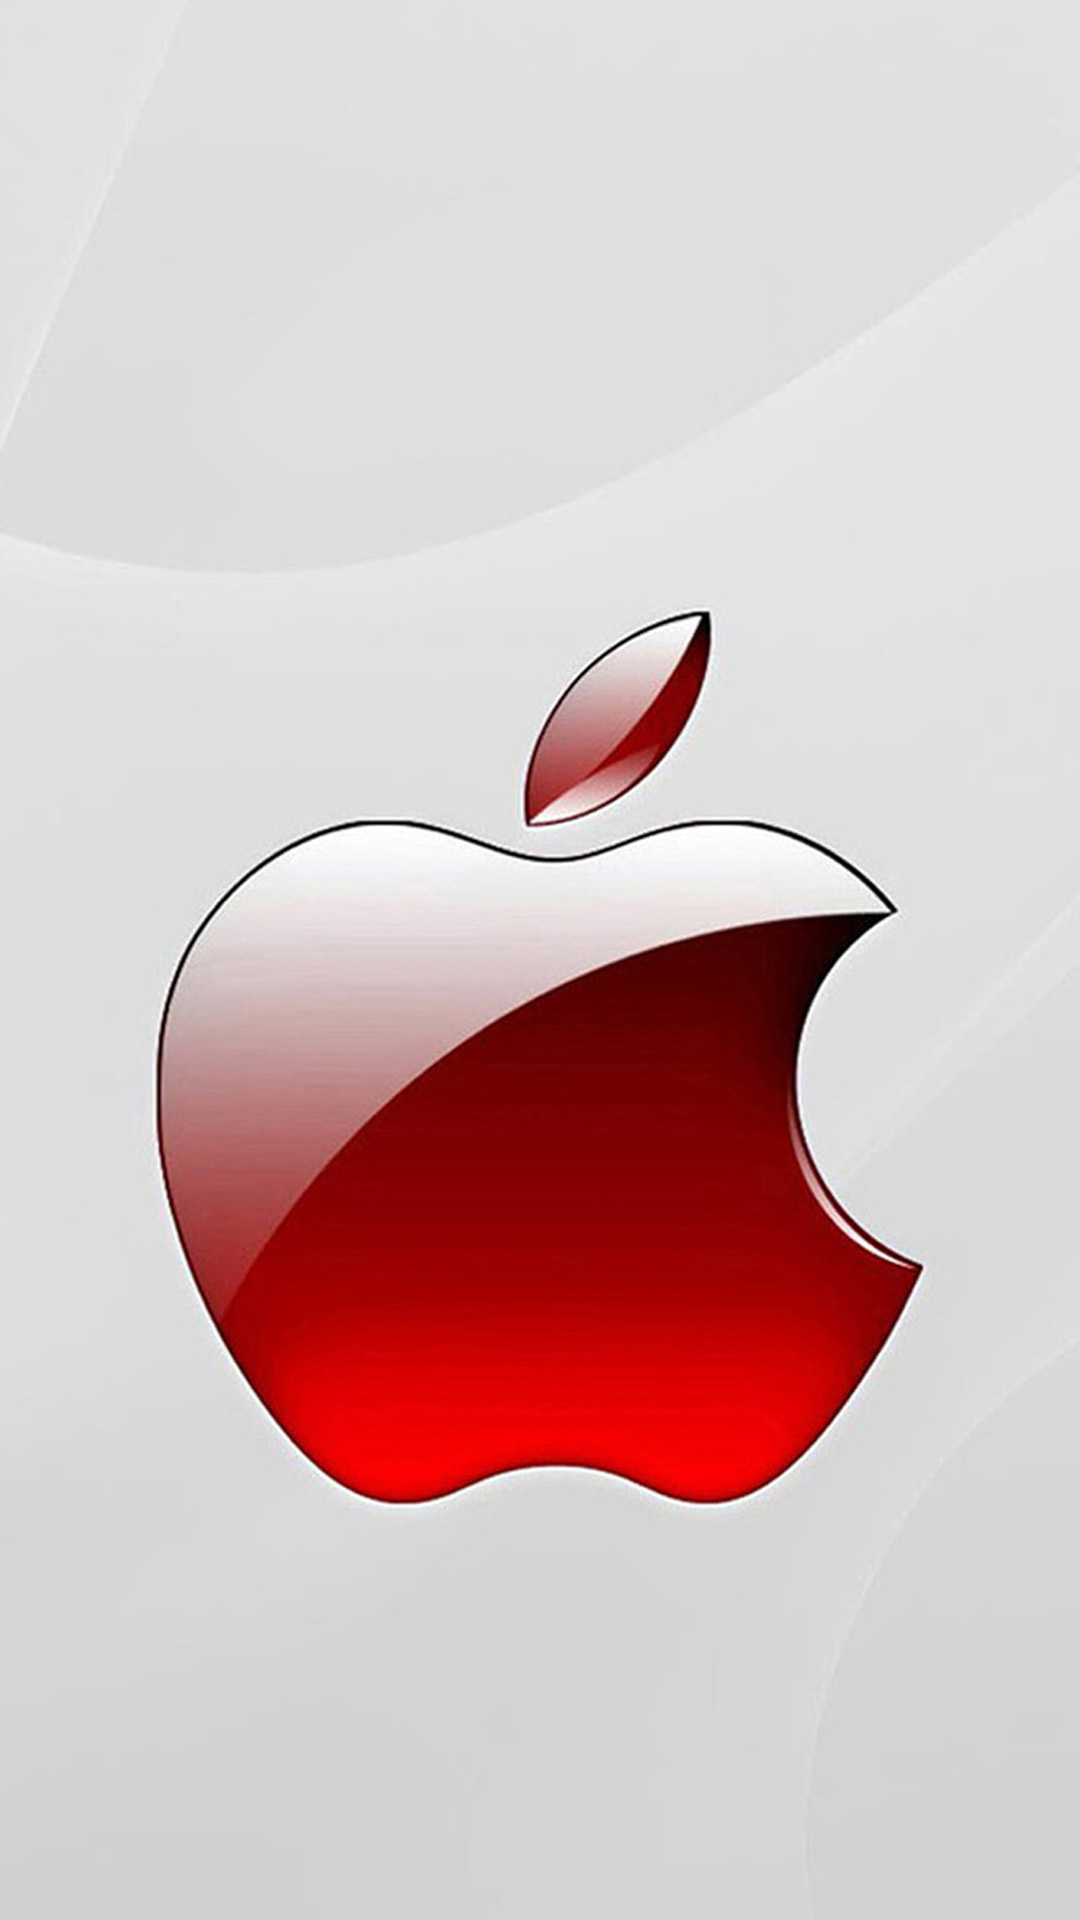 Red Apple LOGO 01 iPhone 6 and 6 plus wallpapers